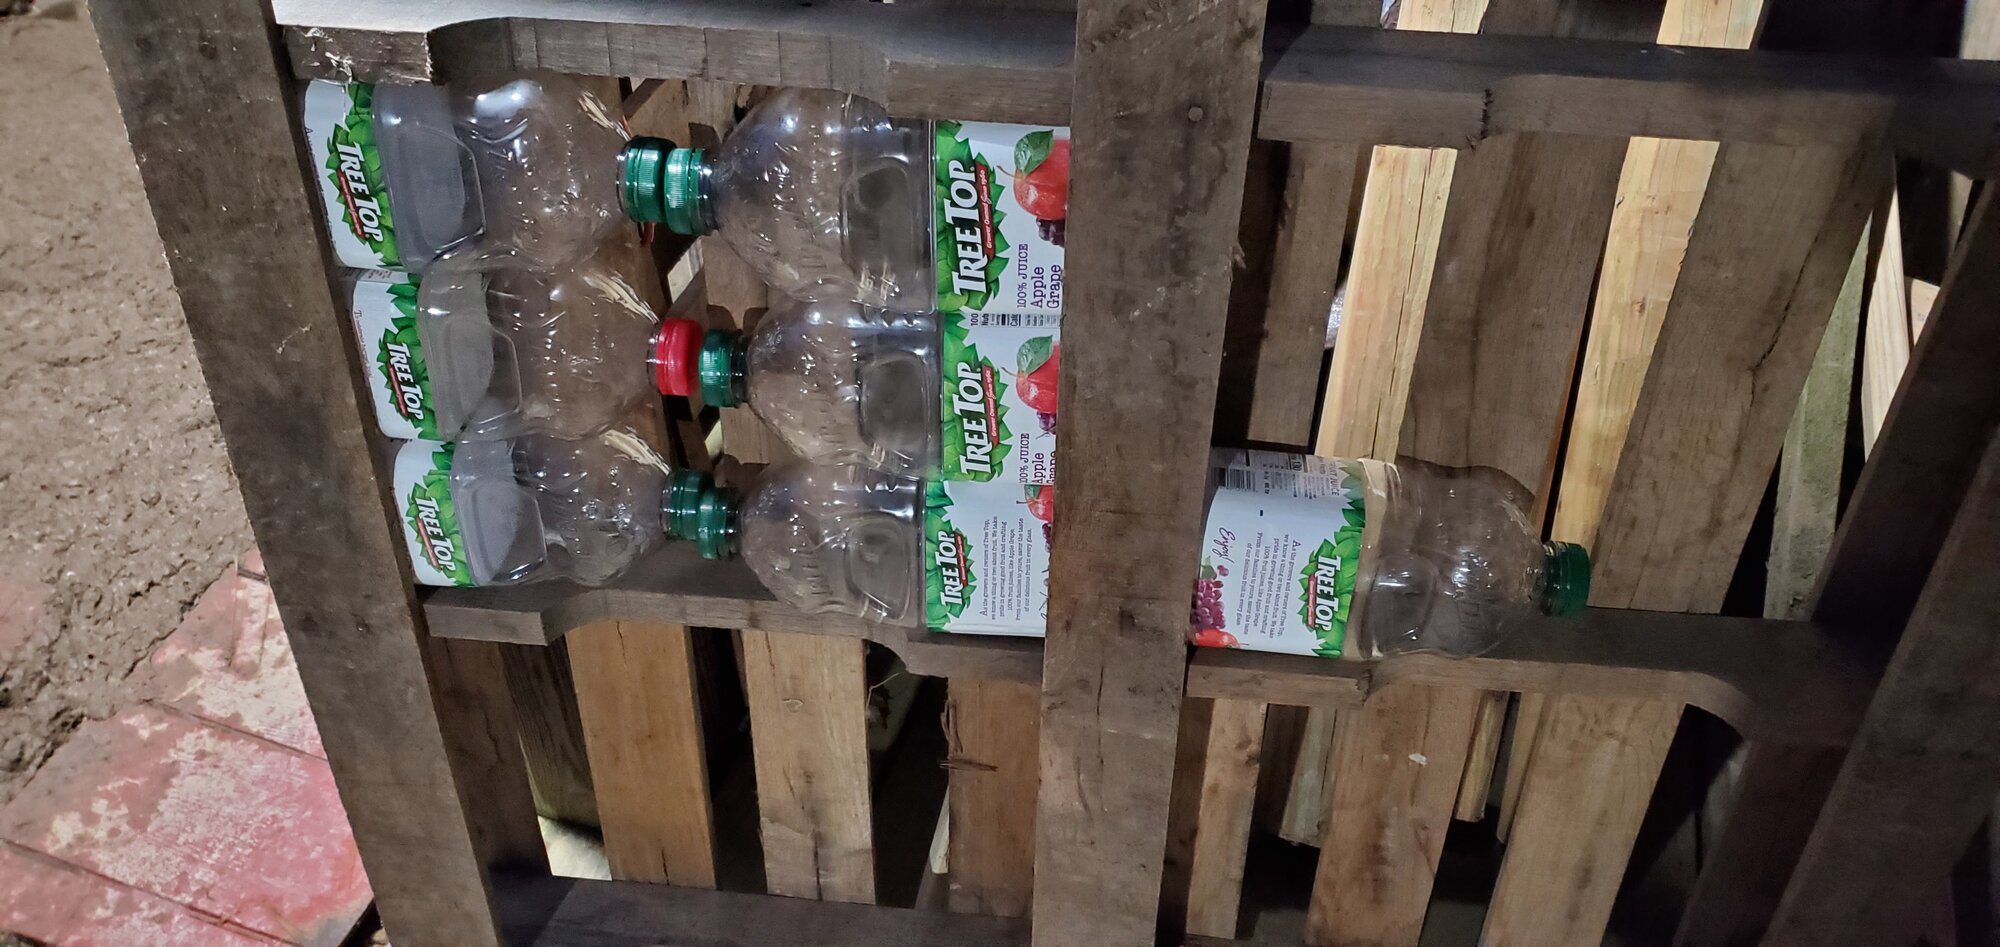 Closeup picture of the juice bottles in he pallet